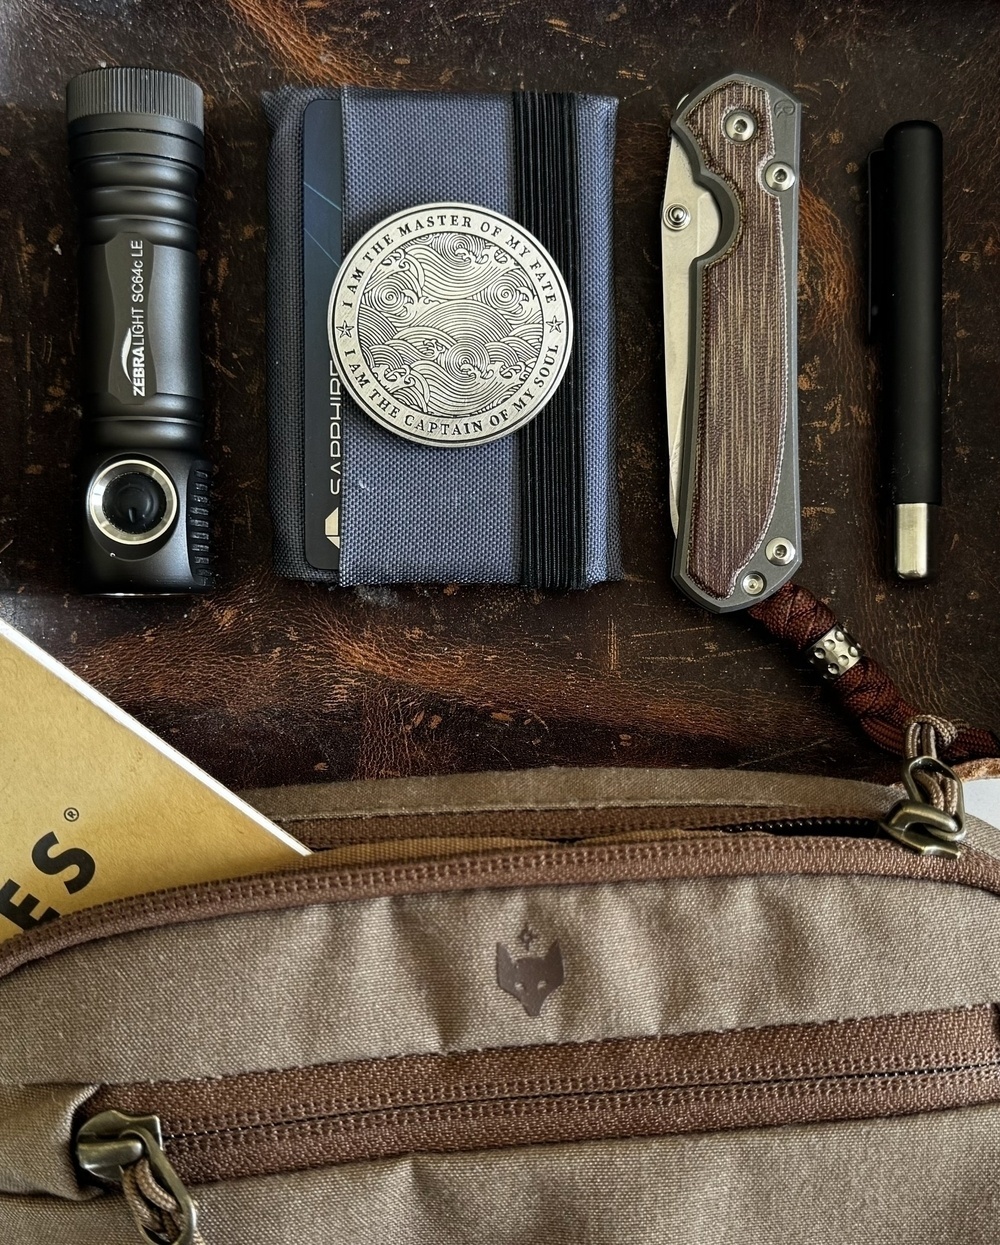 Flashlight, knife, coin on a wallet, and pen neatly arranged on a leather surface; tan bag with notebook partially visible. Coin text: “I AM THE MASTER OF MY FATE, I AM THE CAPTAIN OF MY SOUL.”